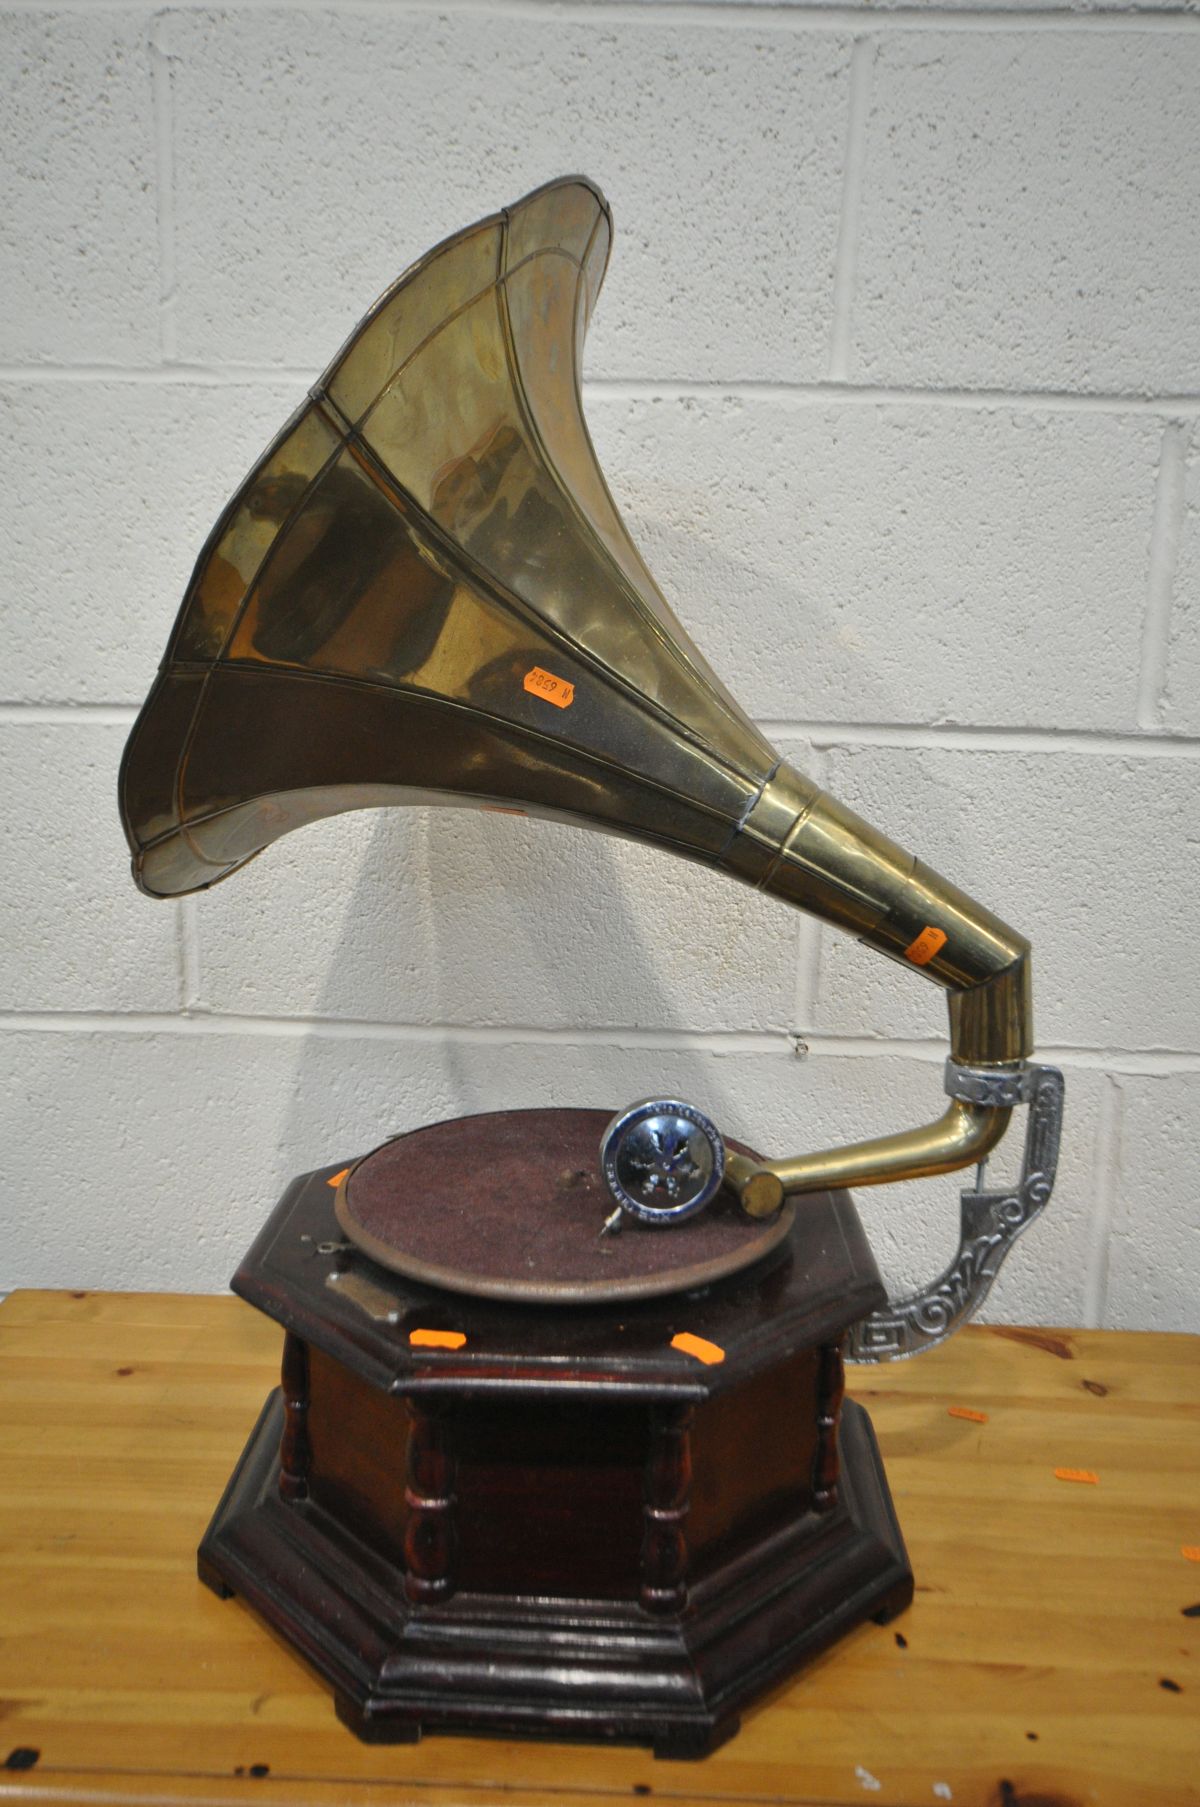 A HIS MASTERS VOICE OCTAGONAL GRAMOPHONE, with a brass horn and winding handle - Image 2 of 5